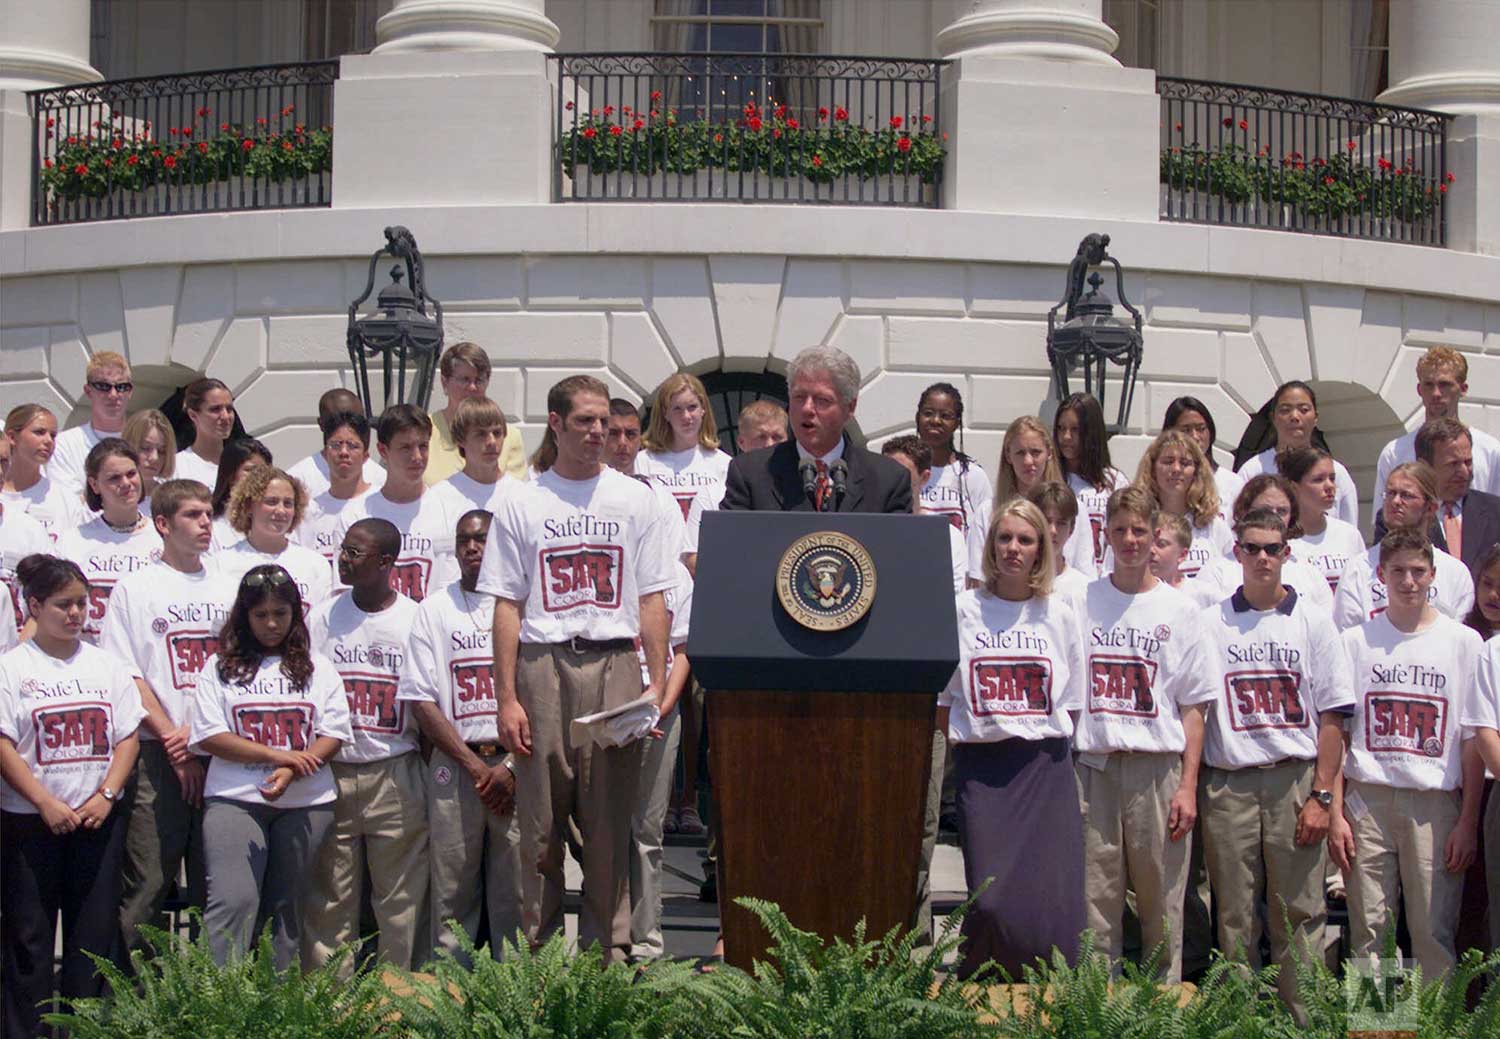  President Clinton is joined by students from Colorado's Columbine High School in an effort to urge Congress to pass gun control legislation during a ceremony on the South Lawn of the White House, Thursday  July 15, 1999. (AP Photo/Susan Walsh) 